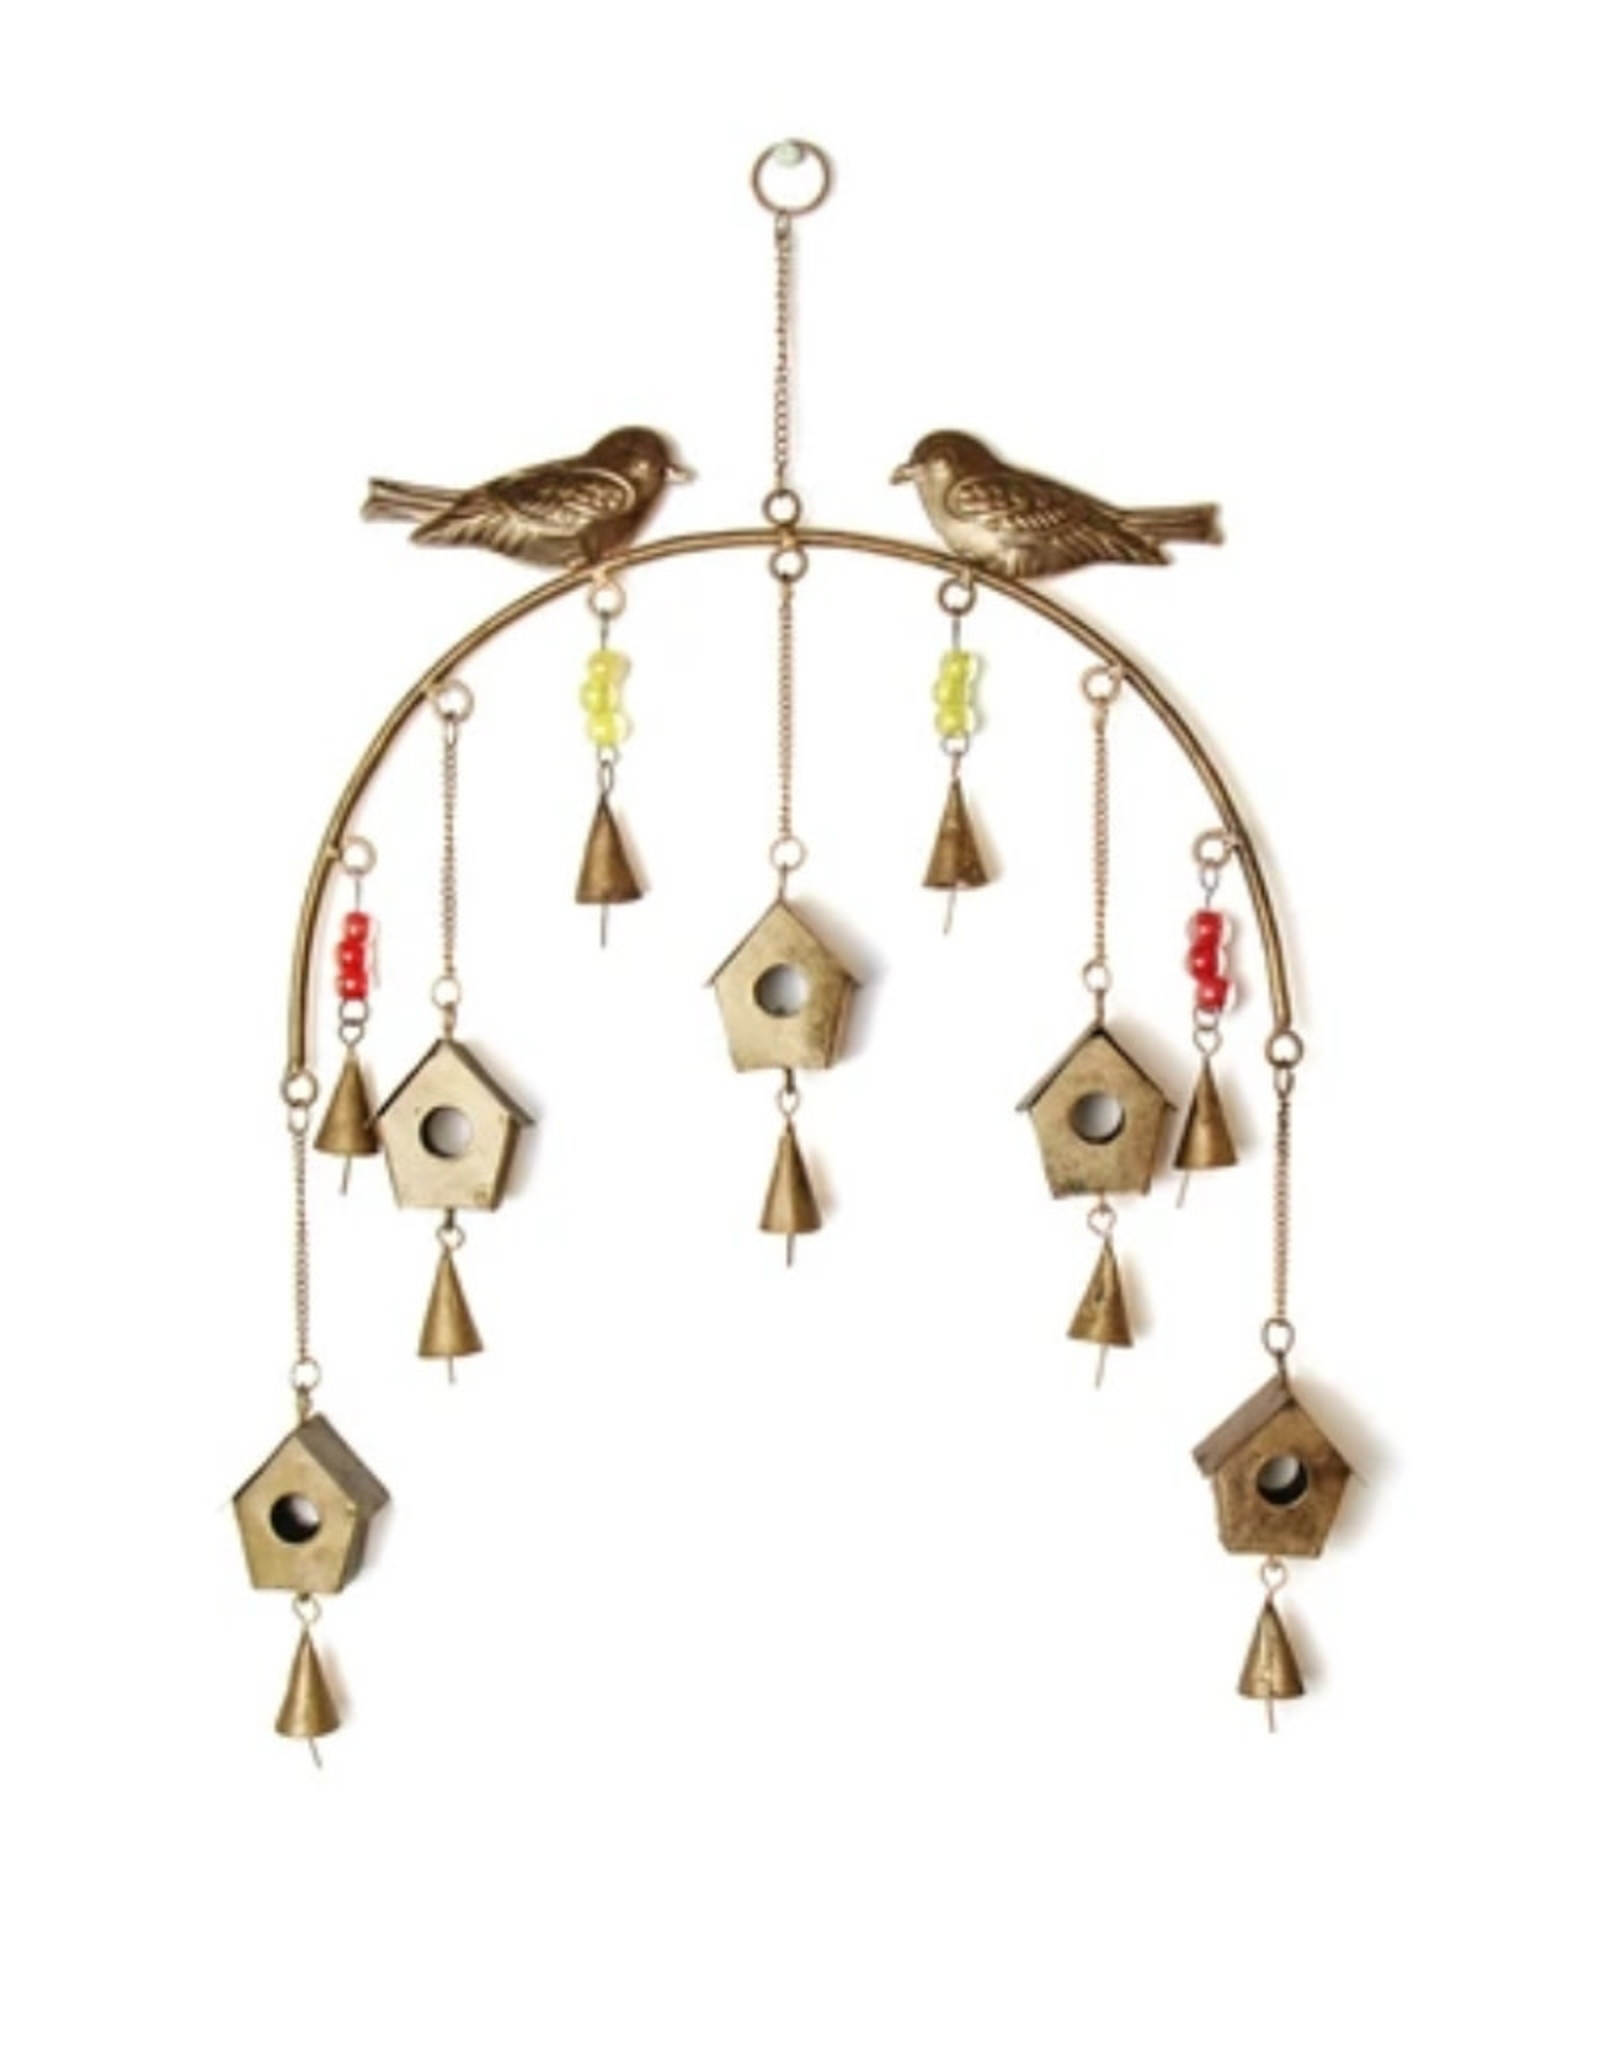 Global Crafts Bird Chime Recycled Iron